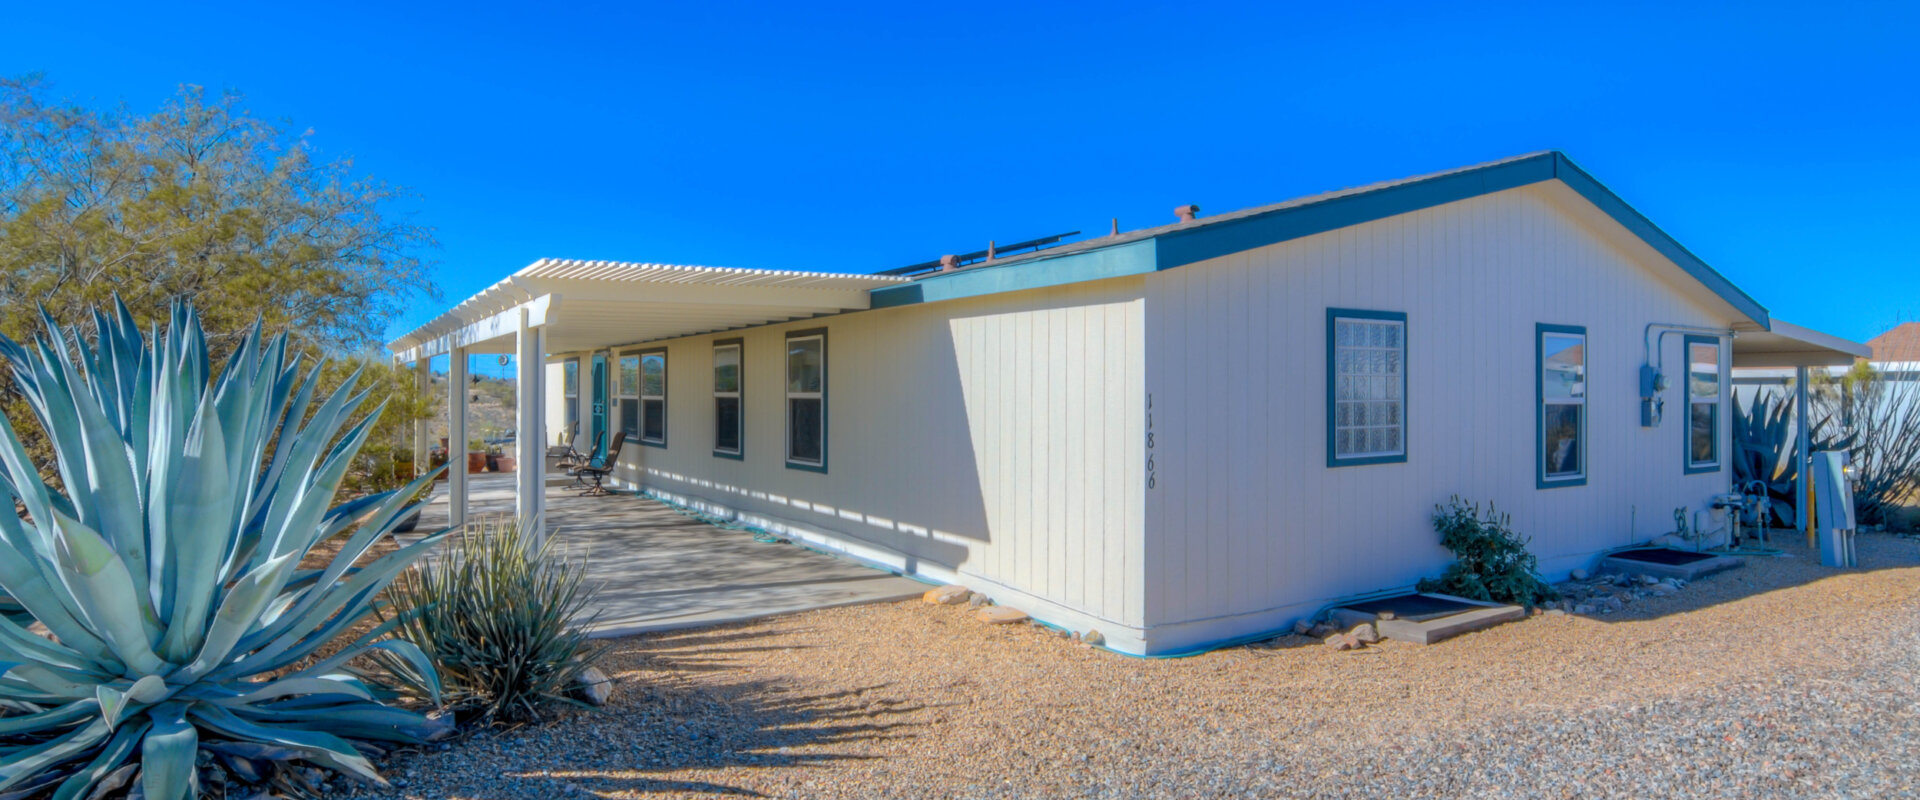 Inherit a Mobile Home in Arizona - What should I do?